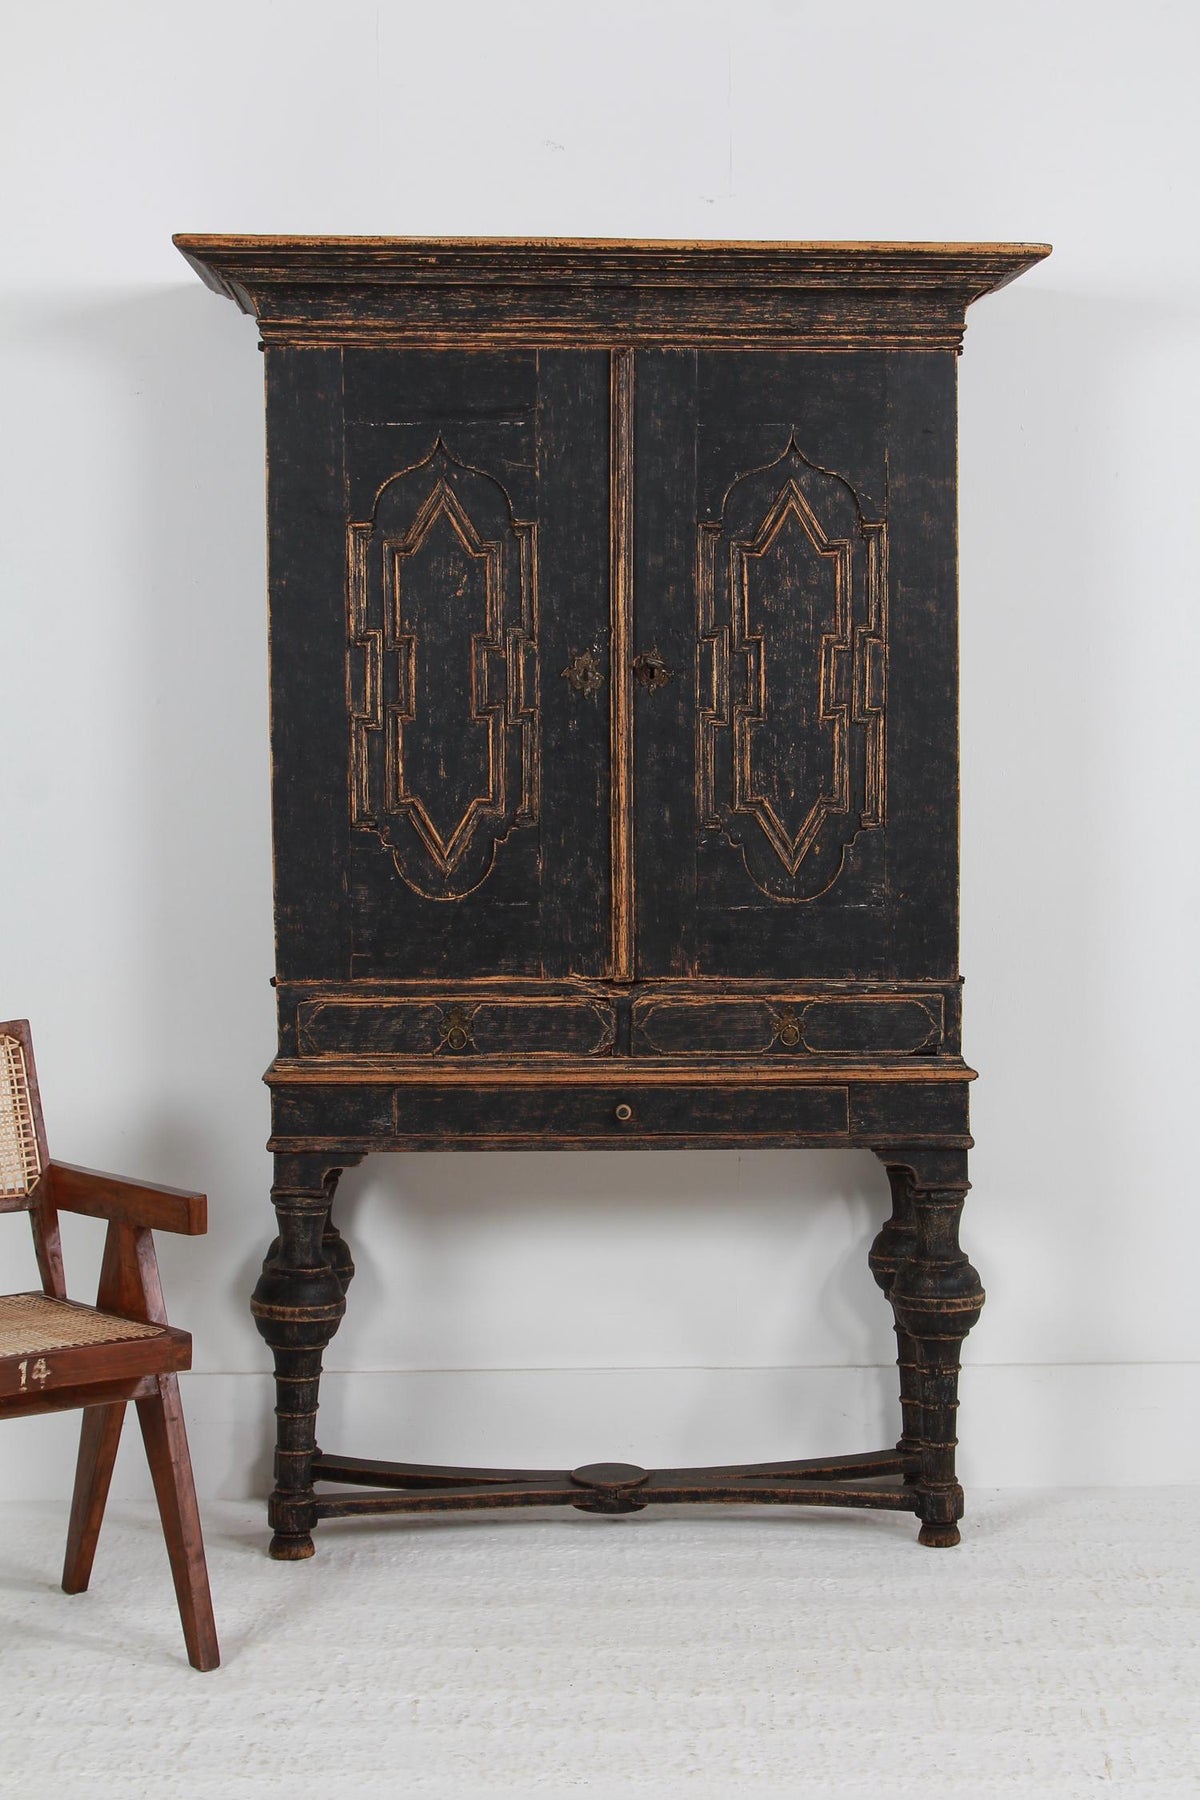 Exceptional Swedish 18thC Baroque Cabinet on Stand